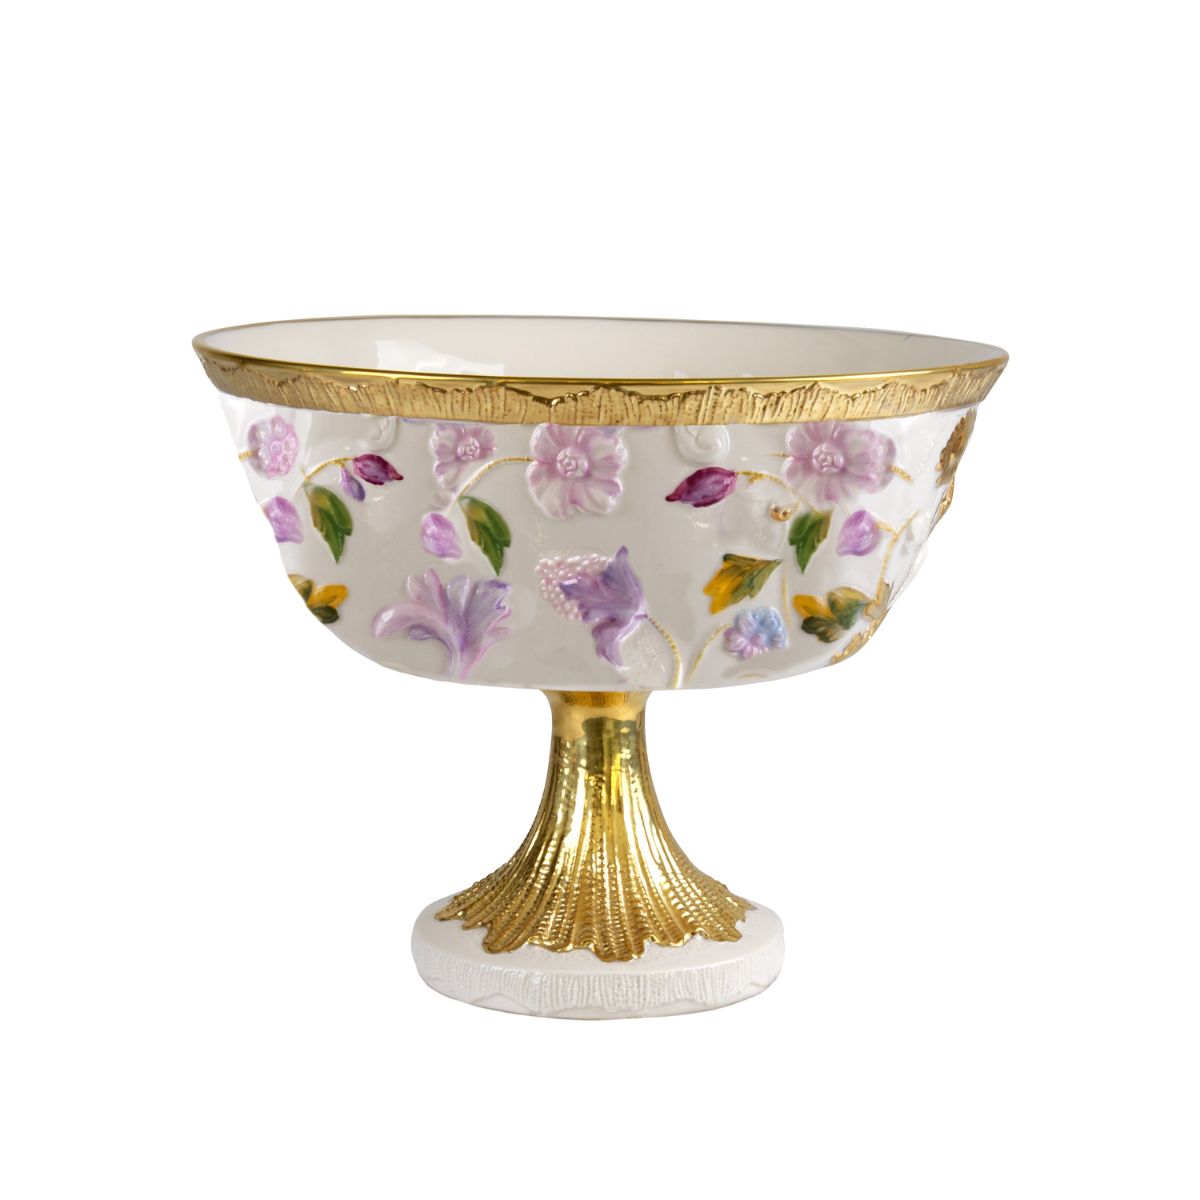 Taormina Multicolor & Gold Footed Fruit Bowl